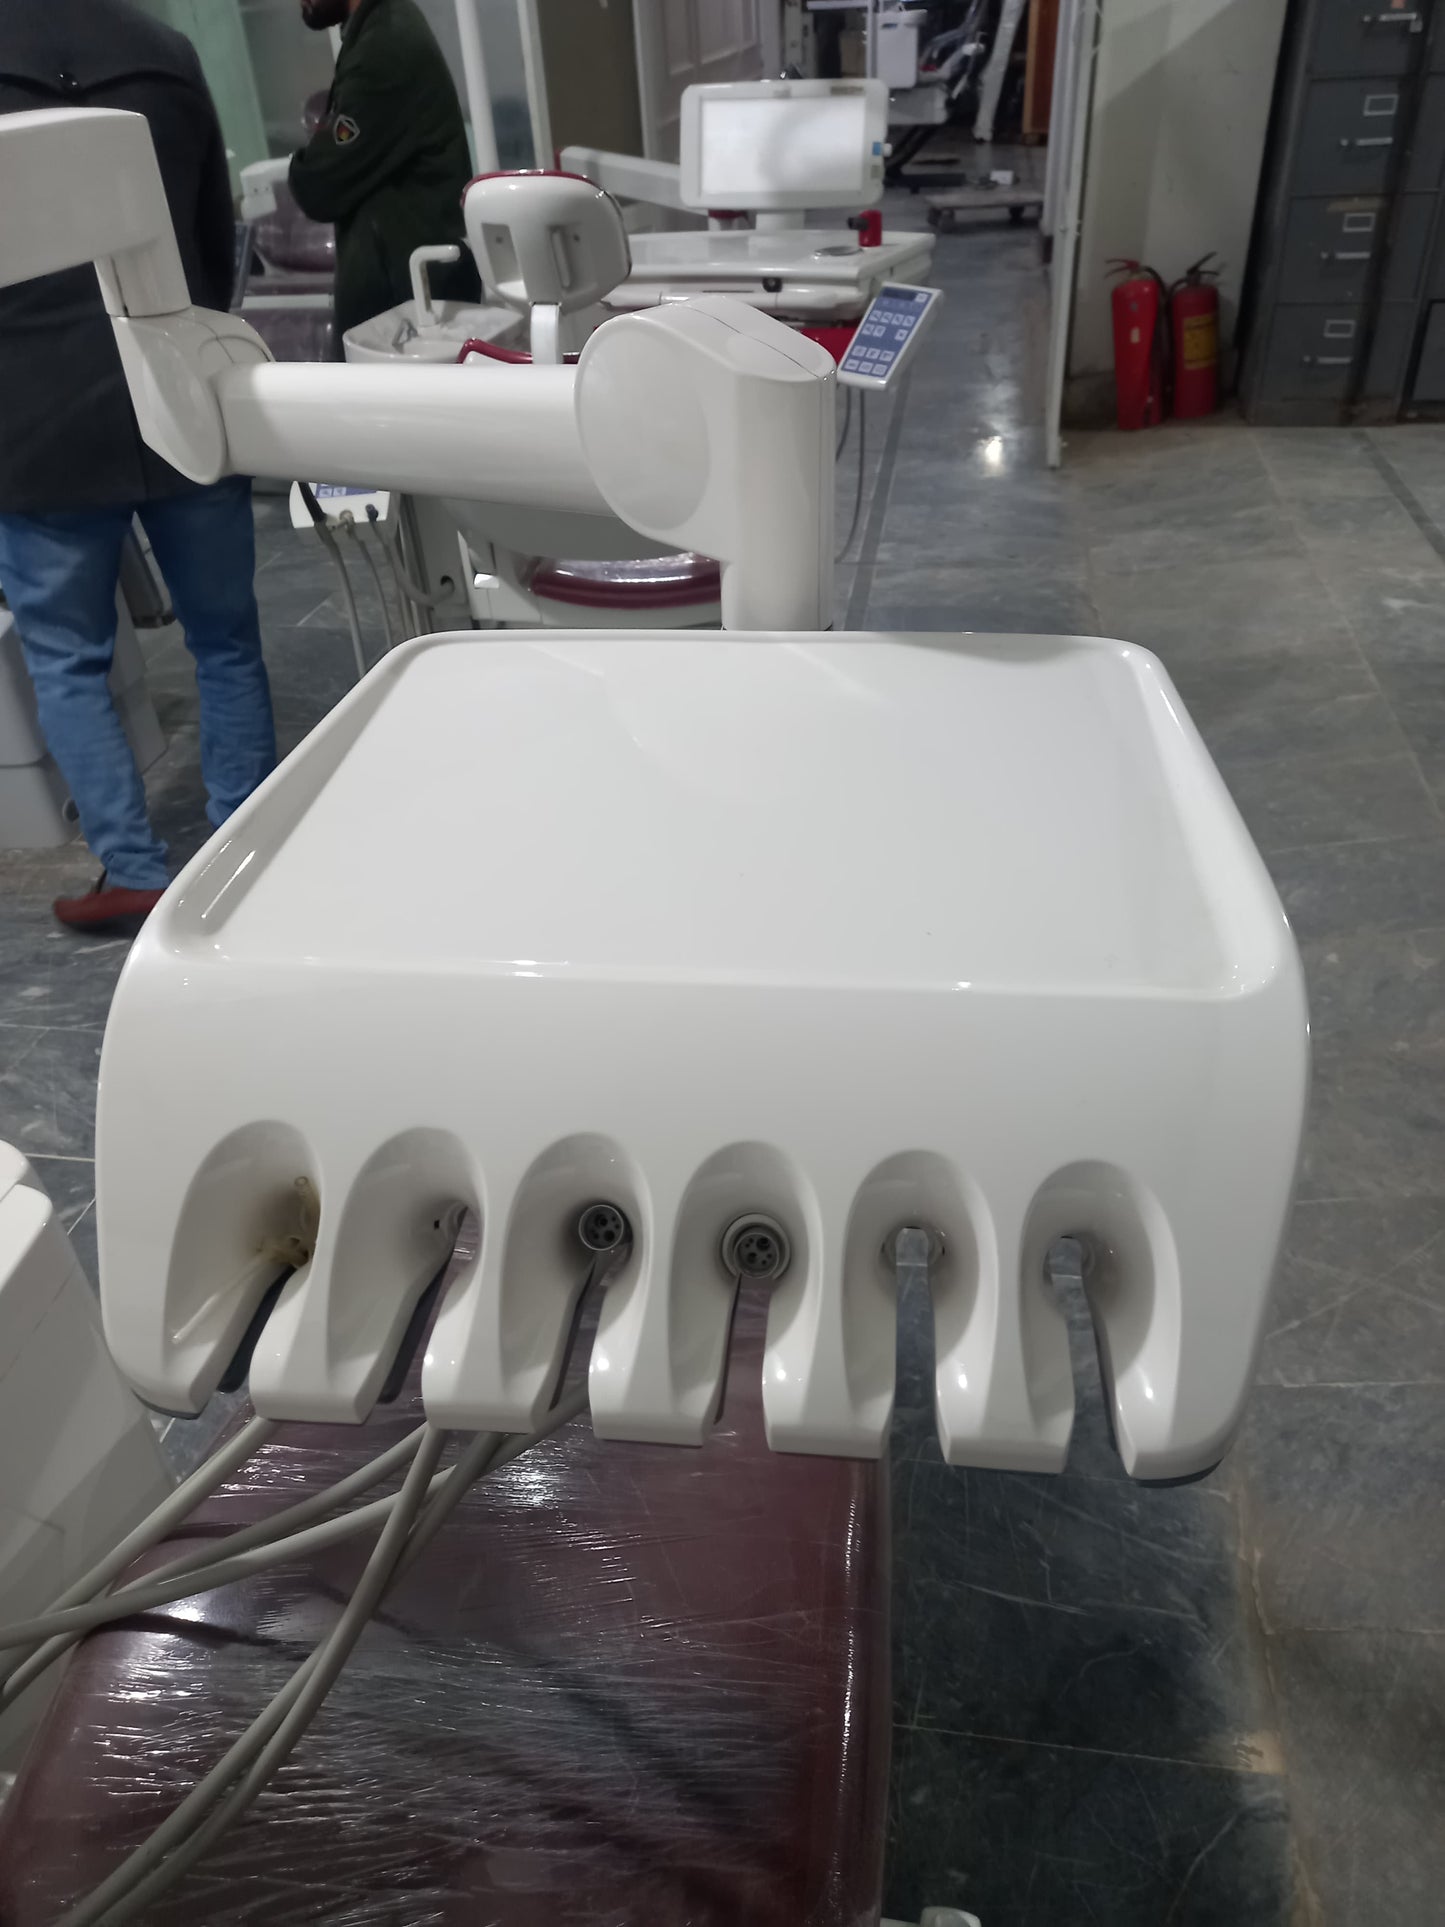 Fona Dental Chair/Unit Made in Italy (Original Condition)